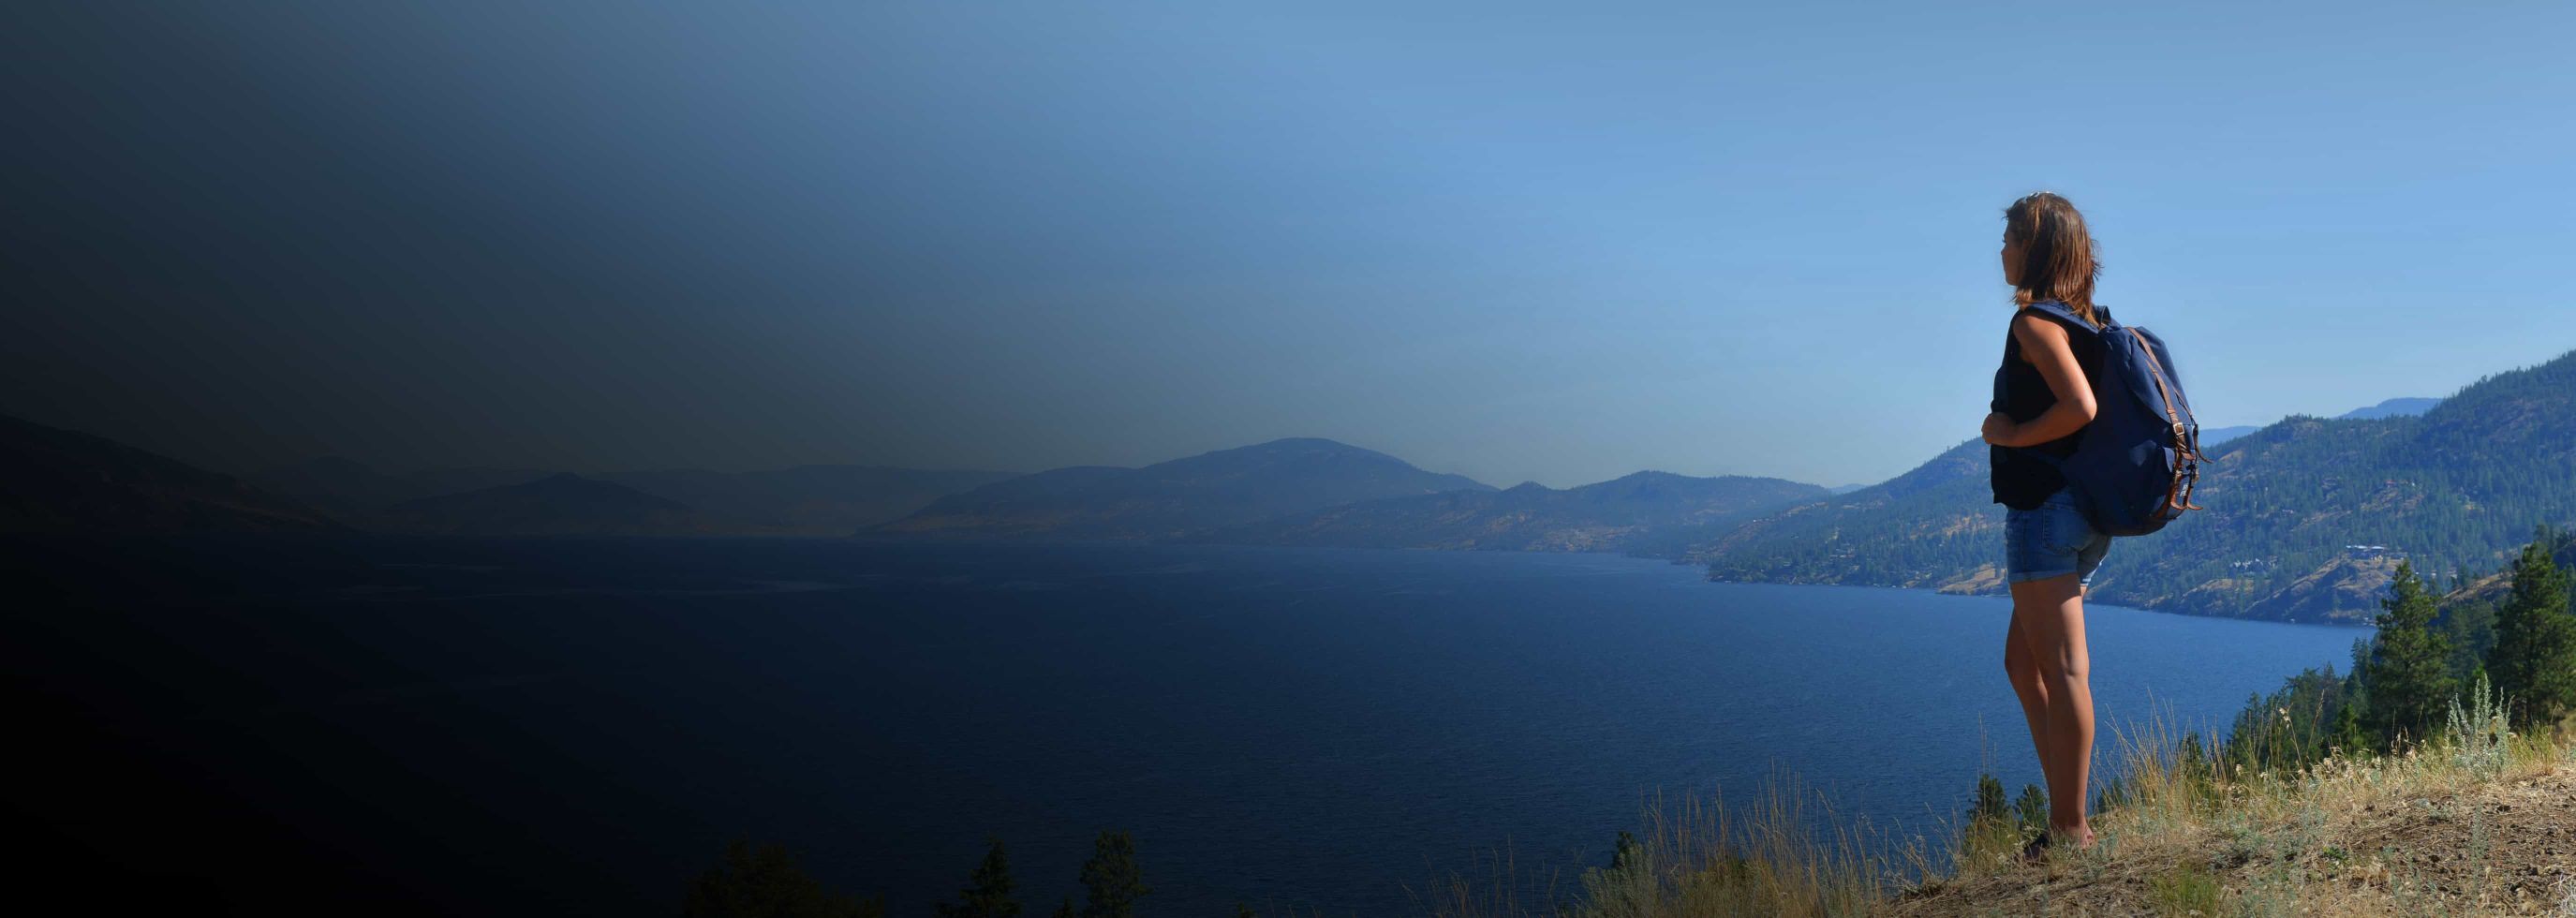 a person standing on a hill, gazing at a serene view of lake Okanagan